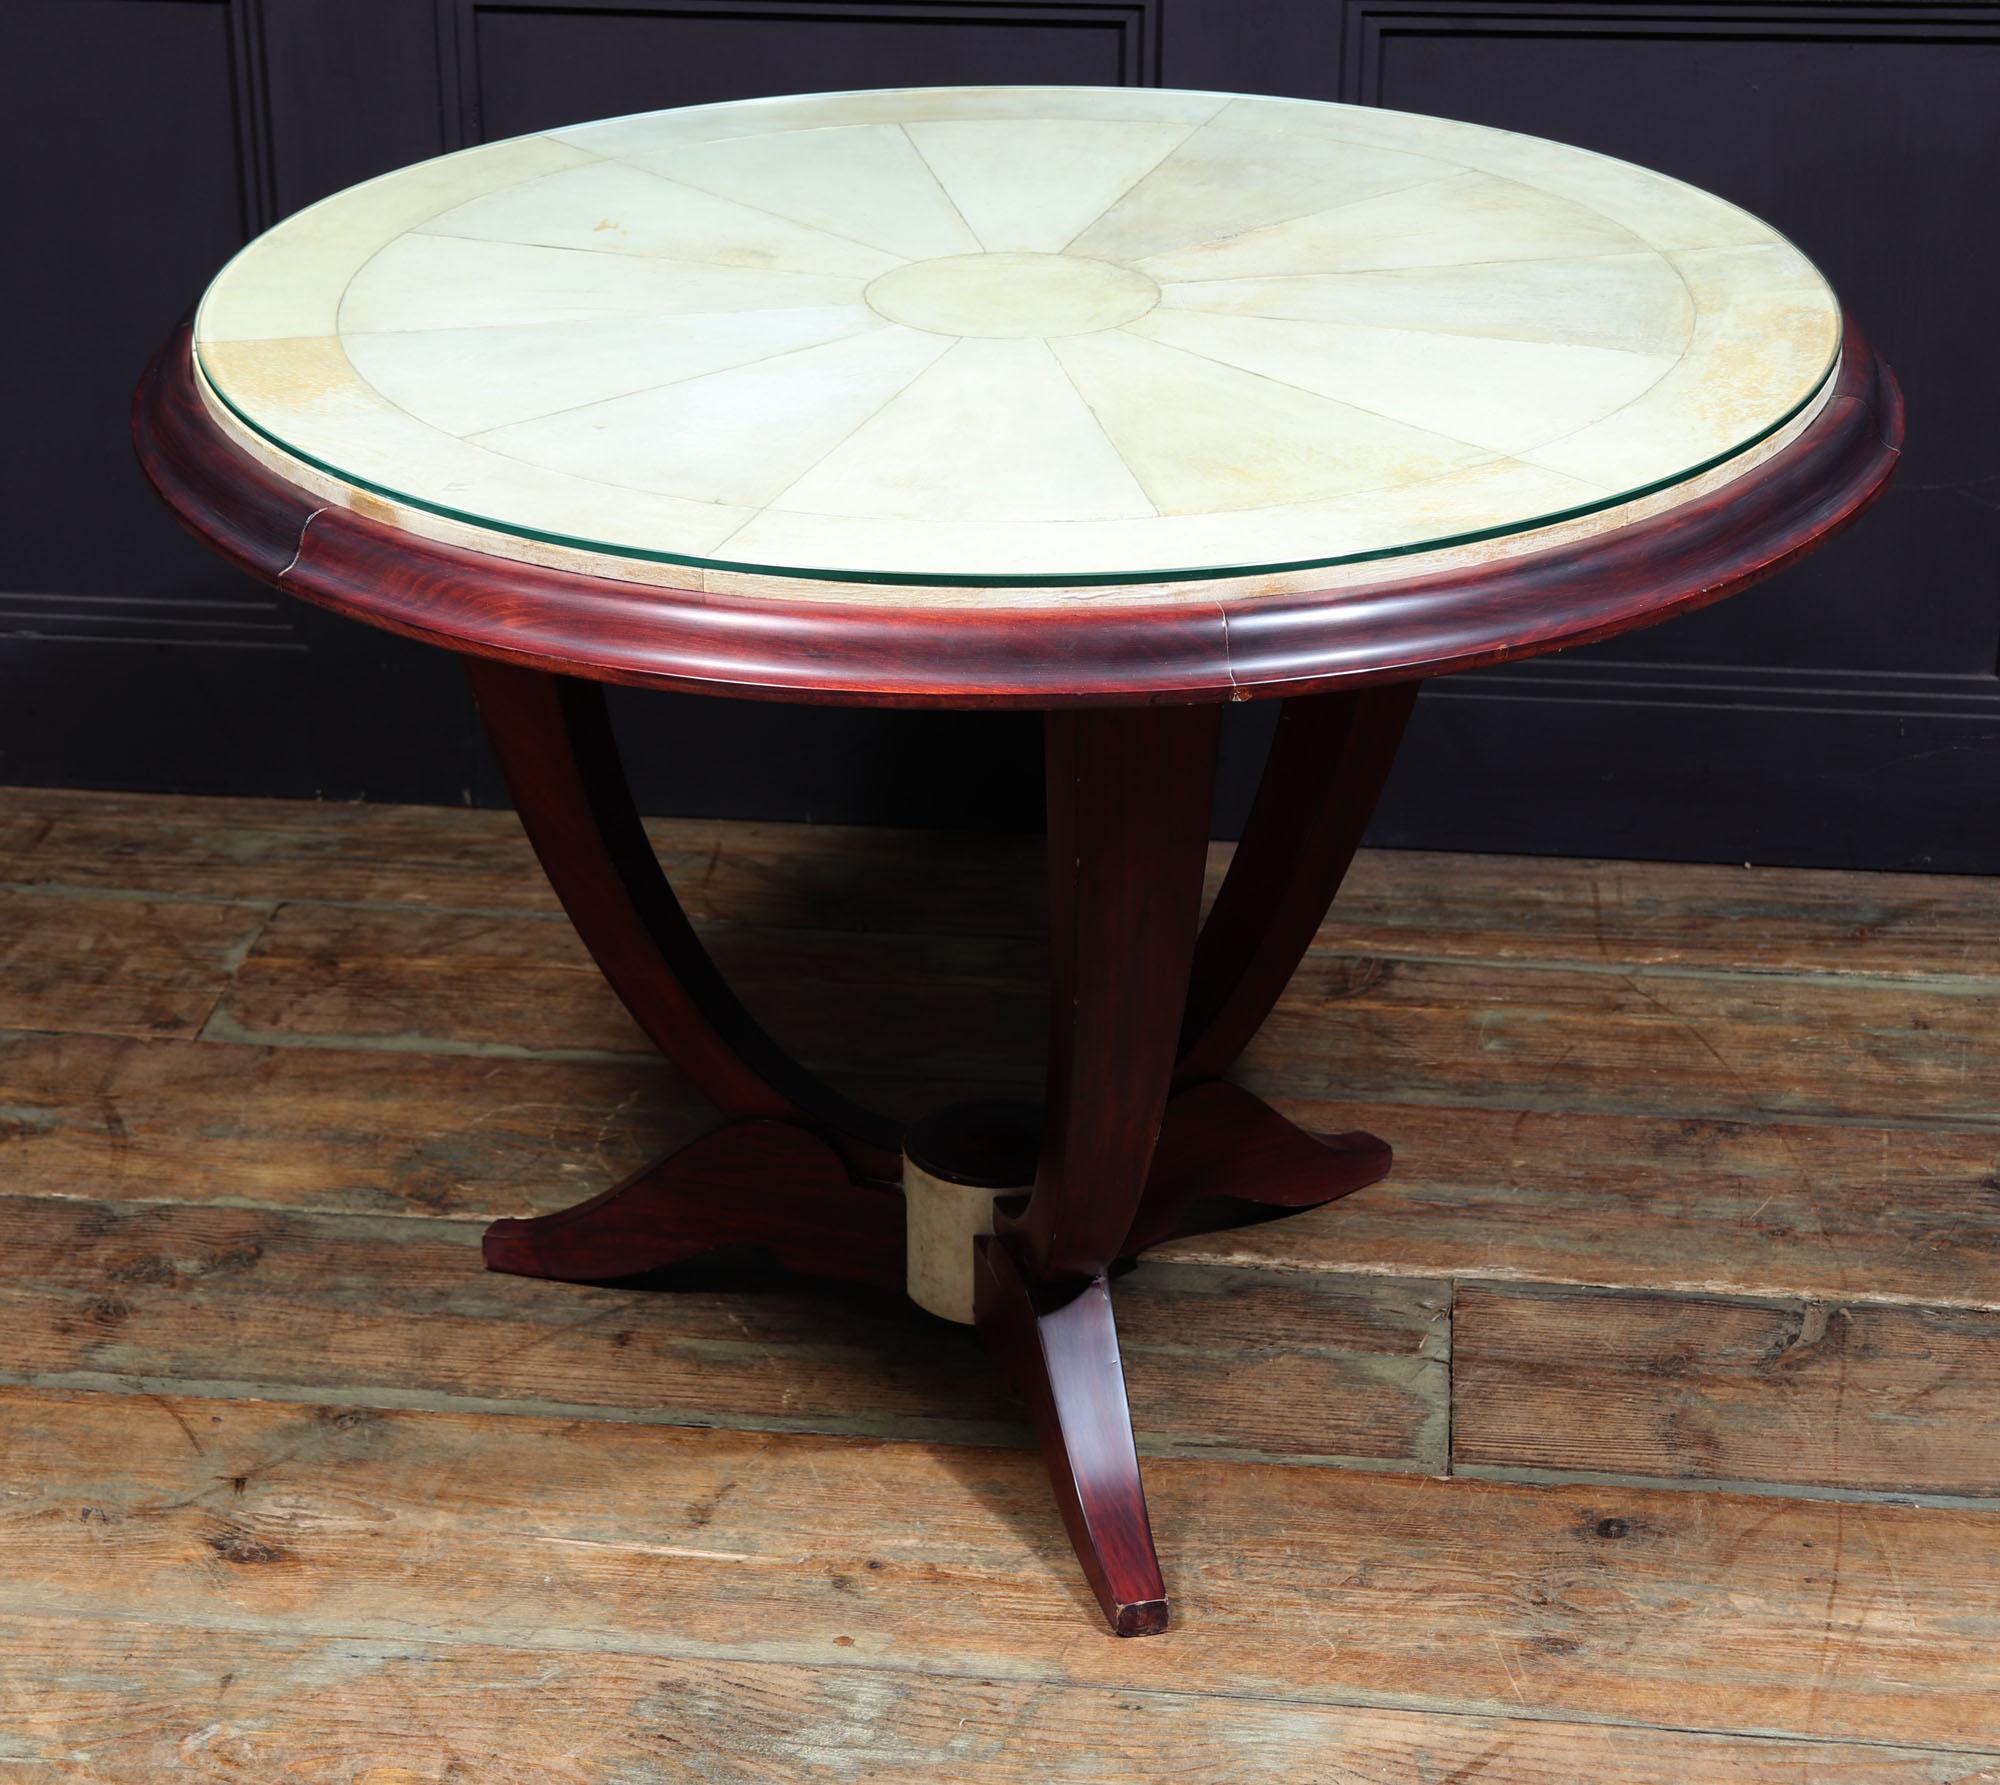 PARCHMENT TOP COFFEE TABLE - ART DECO 
A French Art Deco coffee table with solid mahogany frame with gentle u shape, standing on ornate tripod base, the centre of the base is covered in parchment to match the top that is segmented parchment with